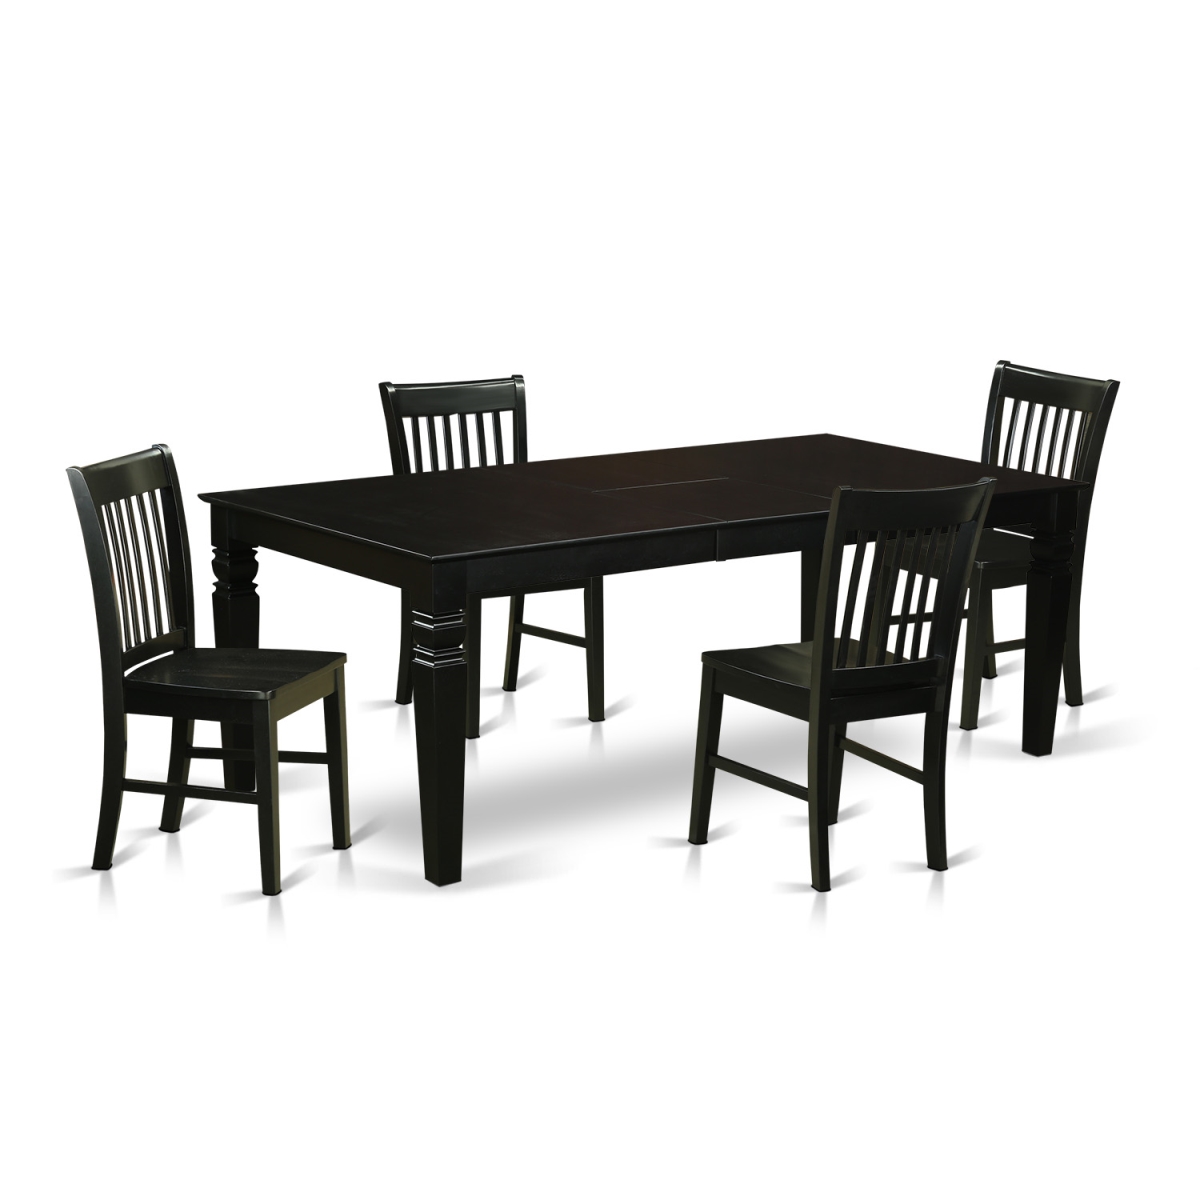 Lgno5-blk-w Dinette Set With A Single Logan Table & 4 Solid Wood Seat Chairs, Distinctive Black - 5 Piece